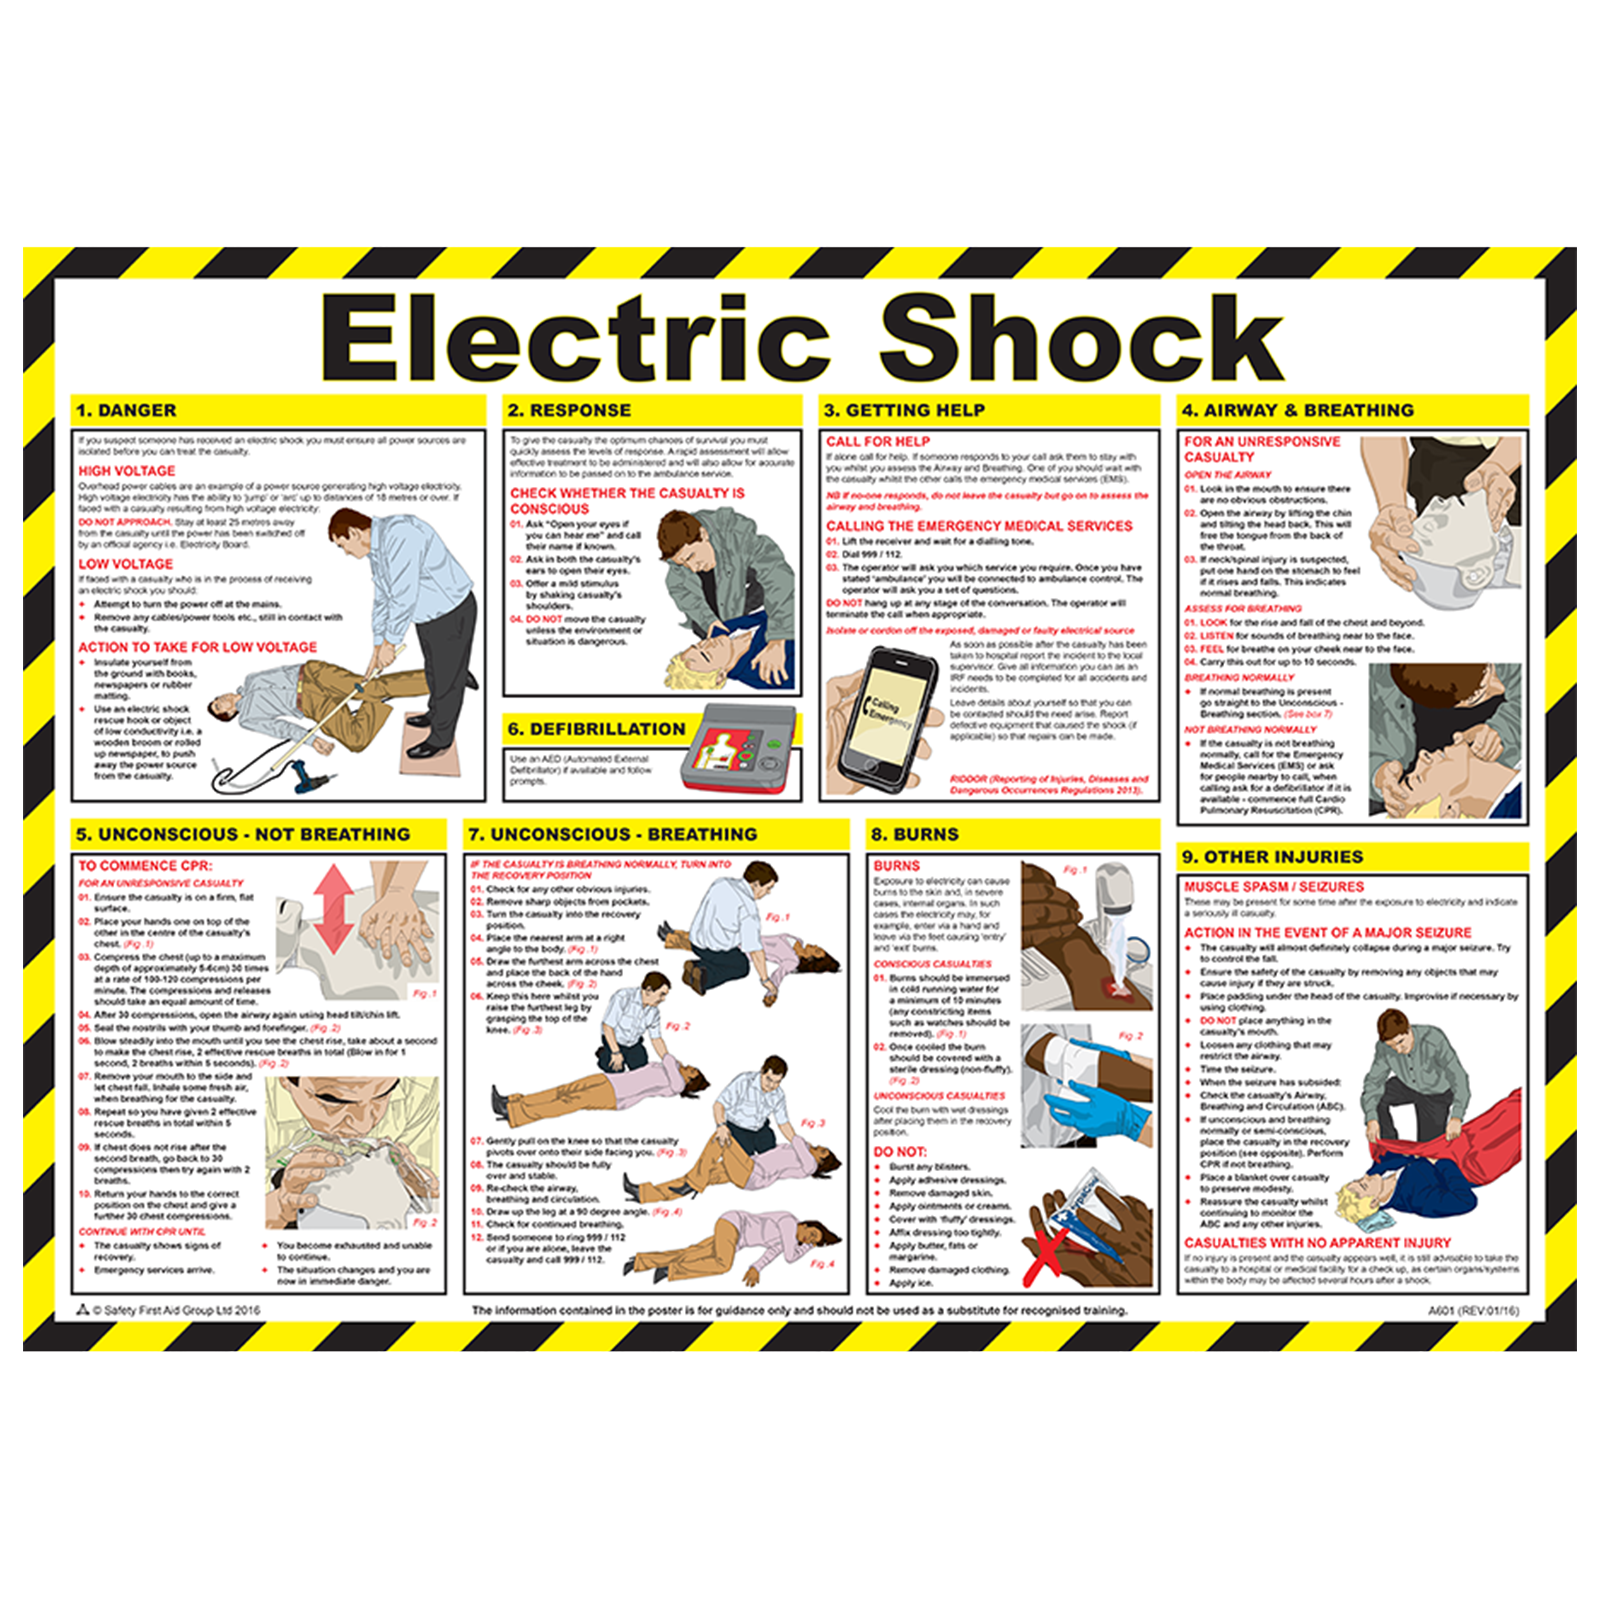 Treatment for an Electric Shock Poster